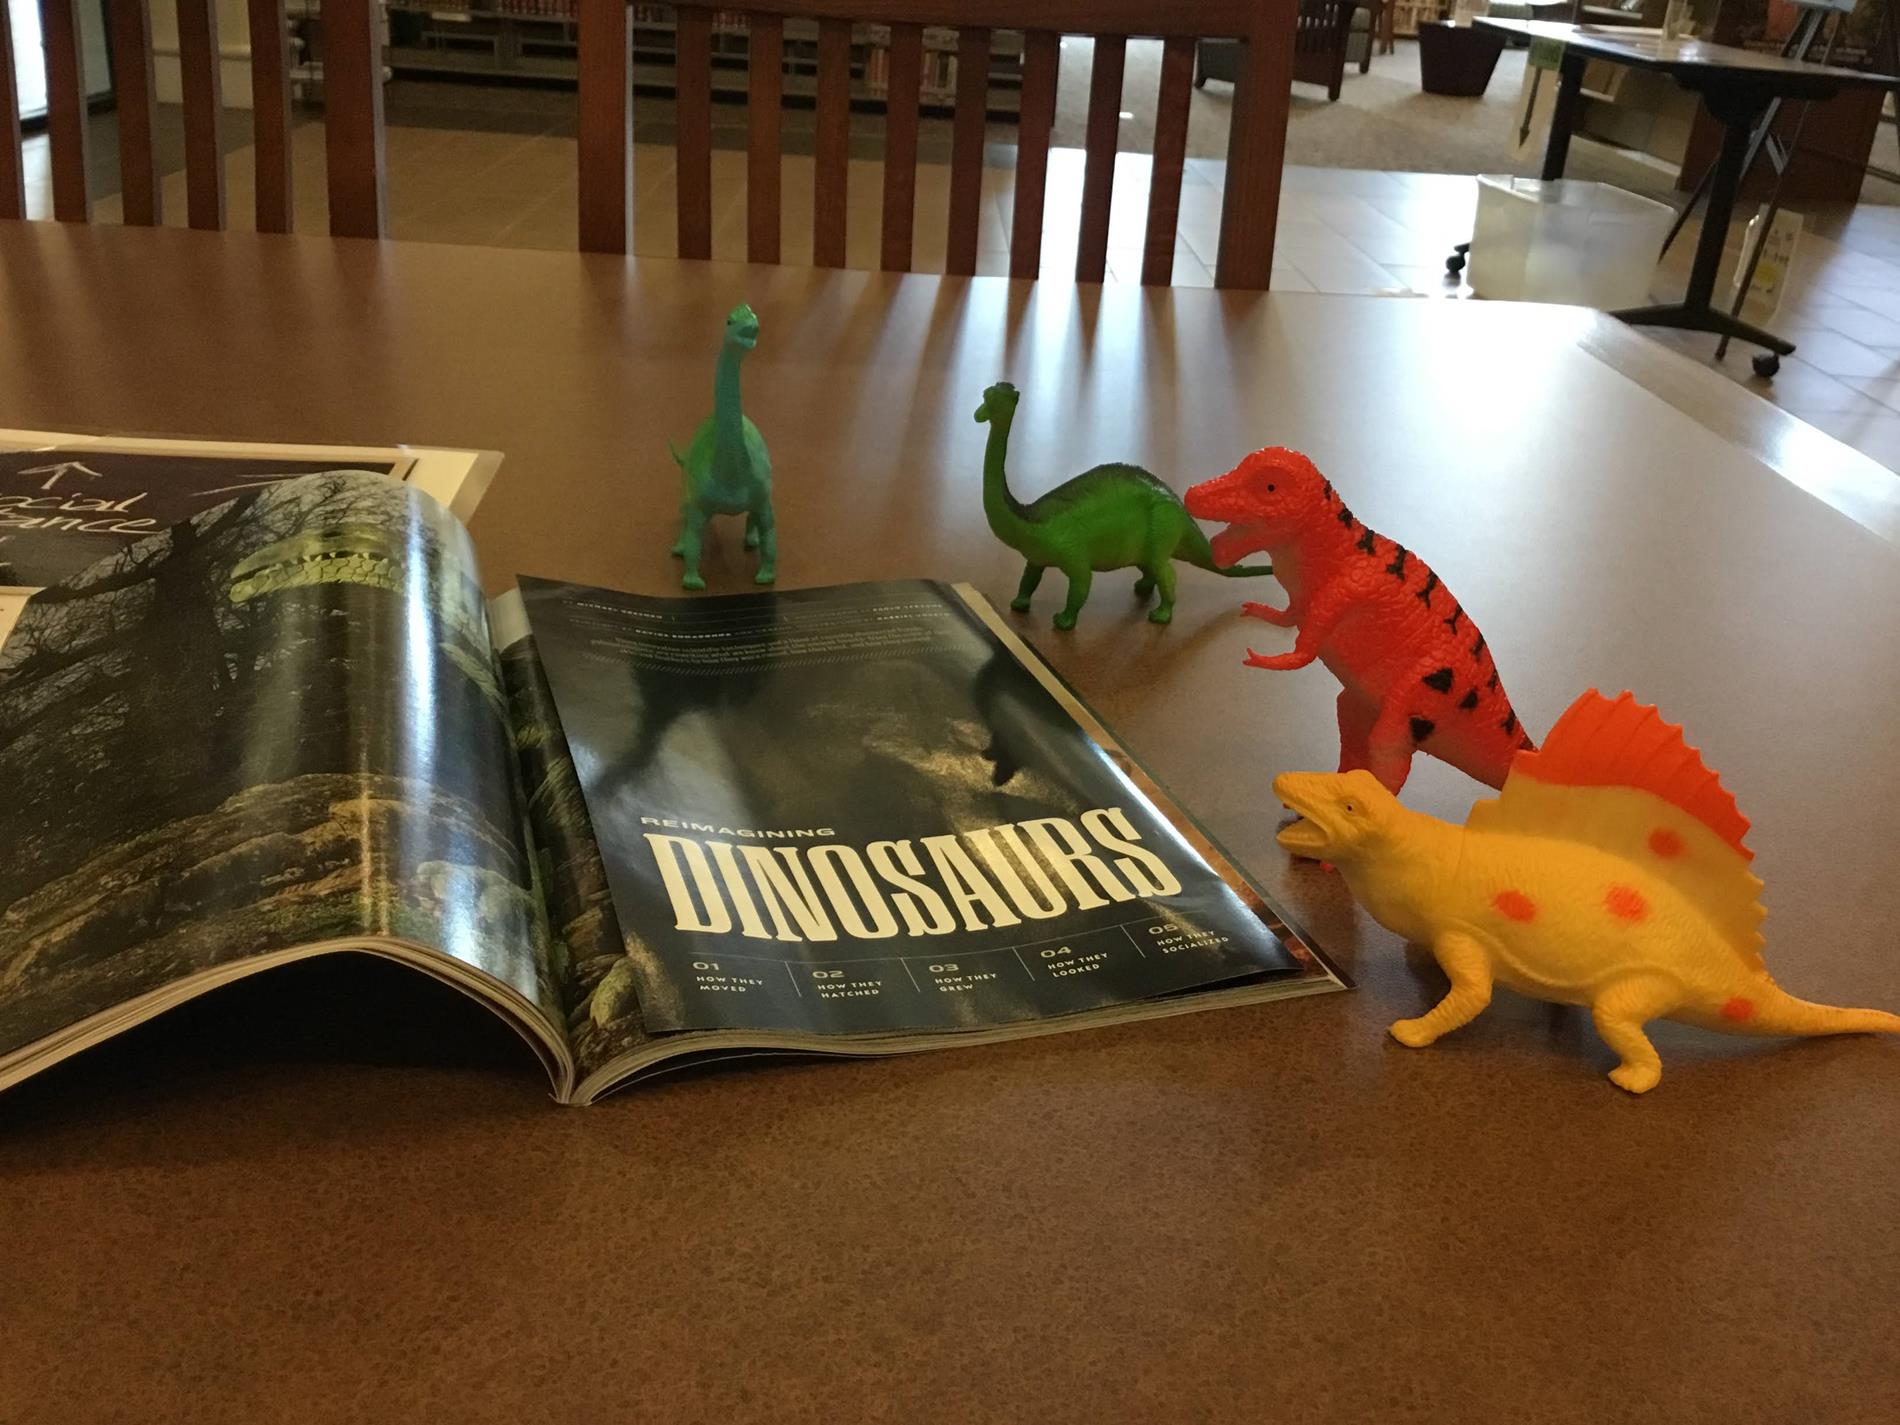 toy dinosaur figures arranged around a National Geographic Magazine opened to an article about Dinosaurs